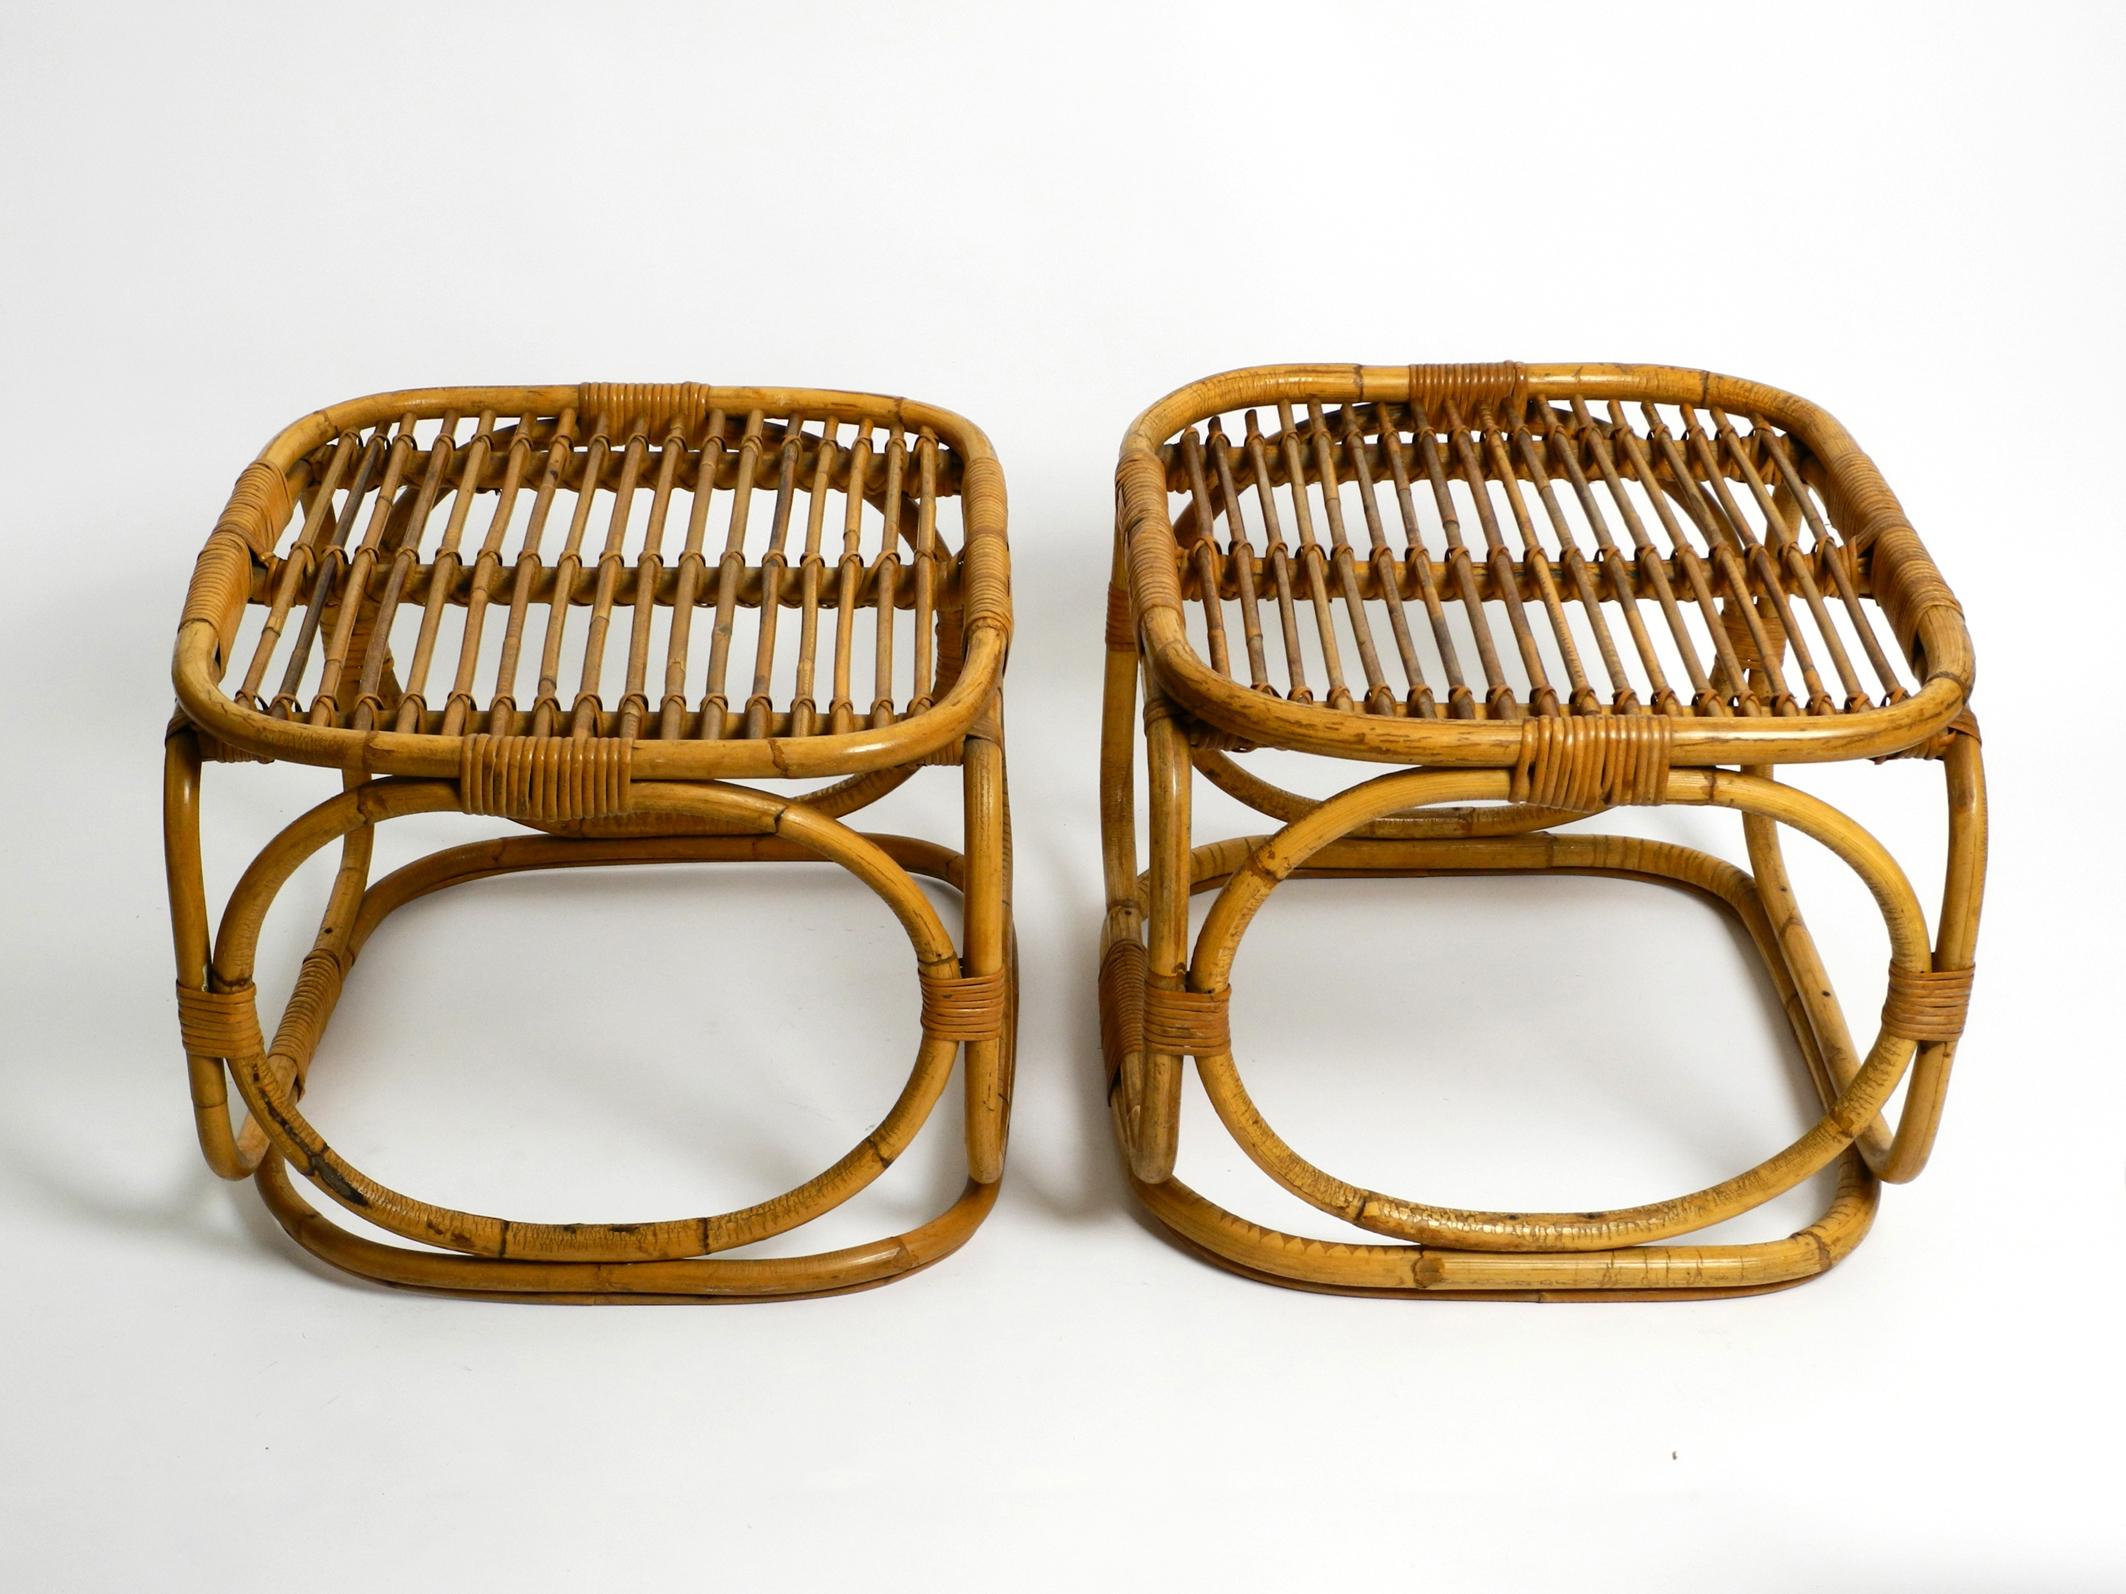 Pair of Very Beautiful Italian Mid Century Side Tables Made of Bamboo Wood 1